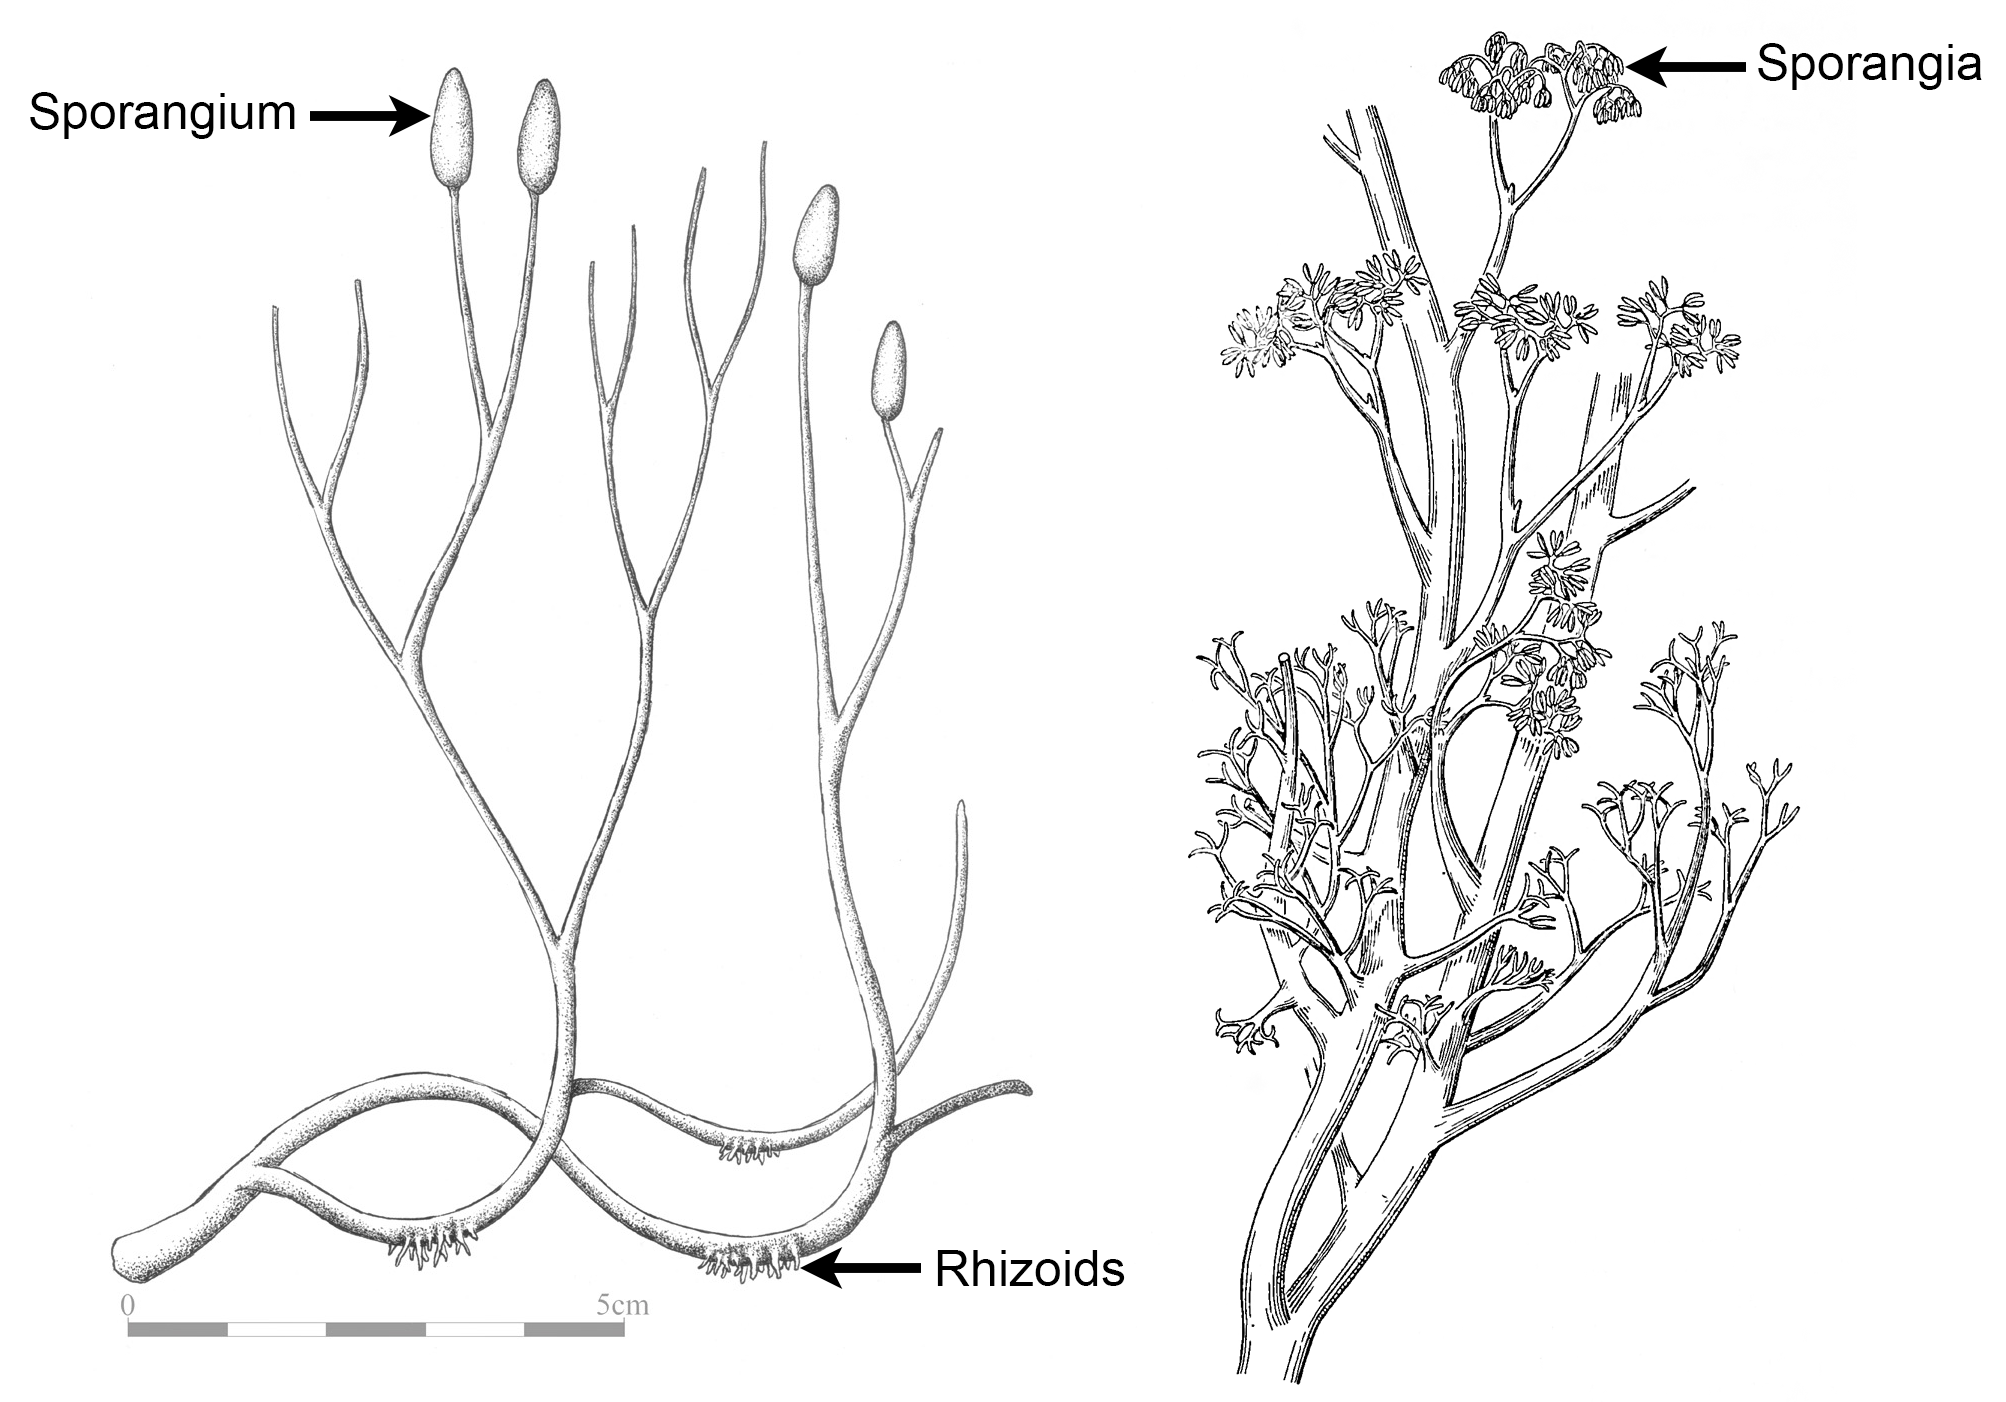 2-Panel figure. Panel 1: Drawing showing a reconstructions of Aglaophyton major, a dichotomizing plant. Panel 2: Drawing showing a reconstruction of Psilophyton dawsonii, a plant with a mix of dichotomous and pseudomonopodial branching.